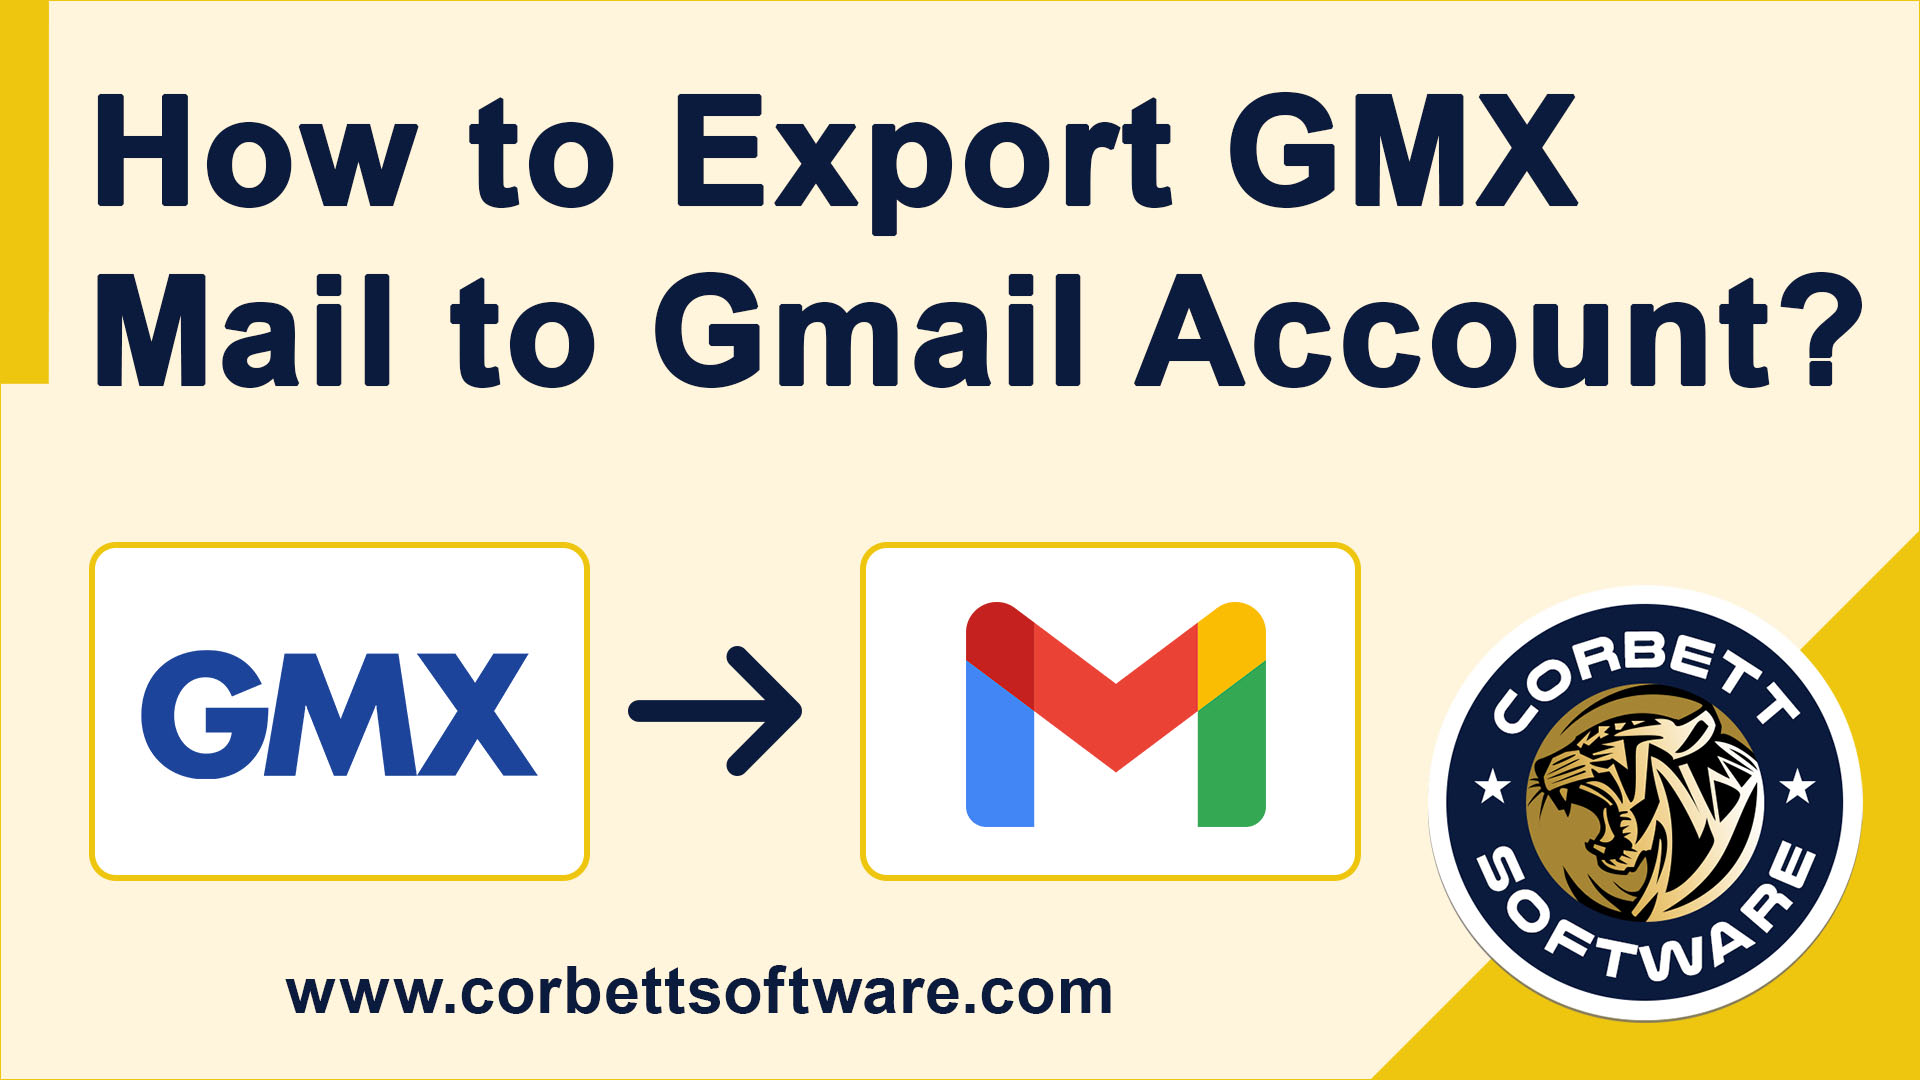 export gmx to gmail account